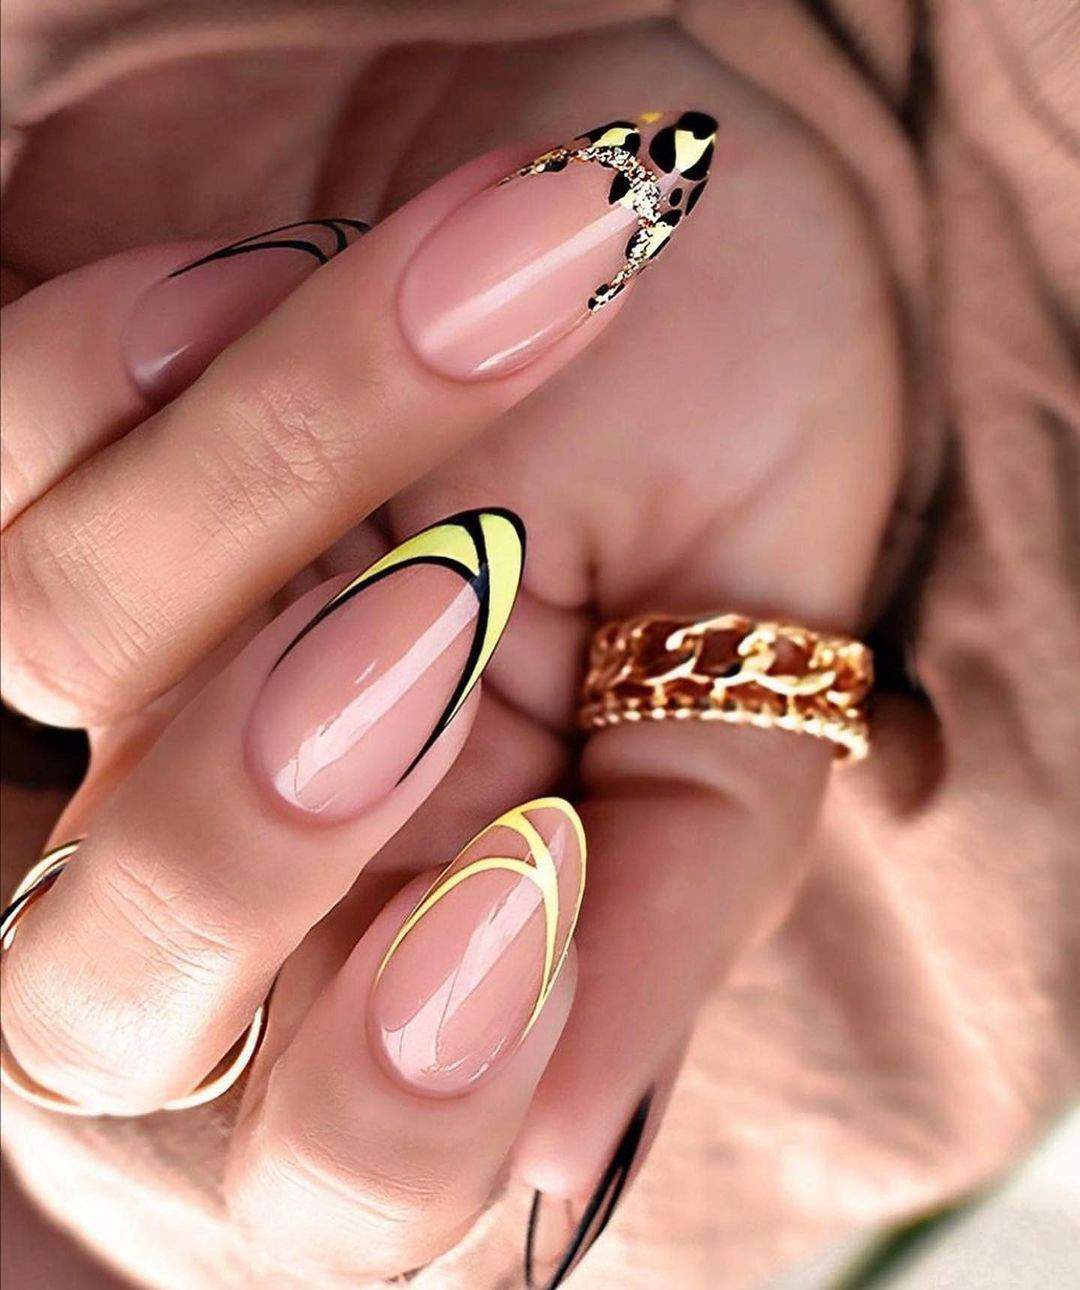 50 Best Nail Designs Trends To Try Out In 2022 images 40